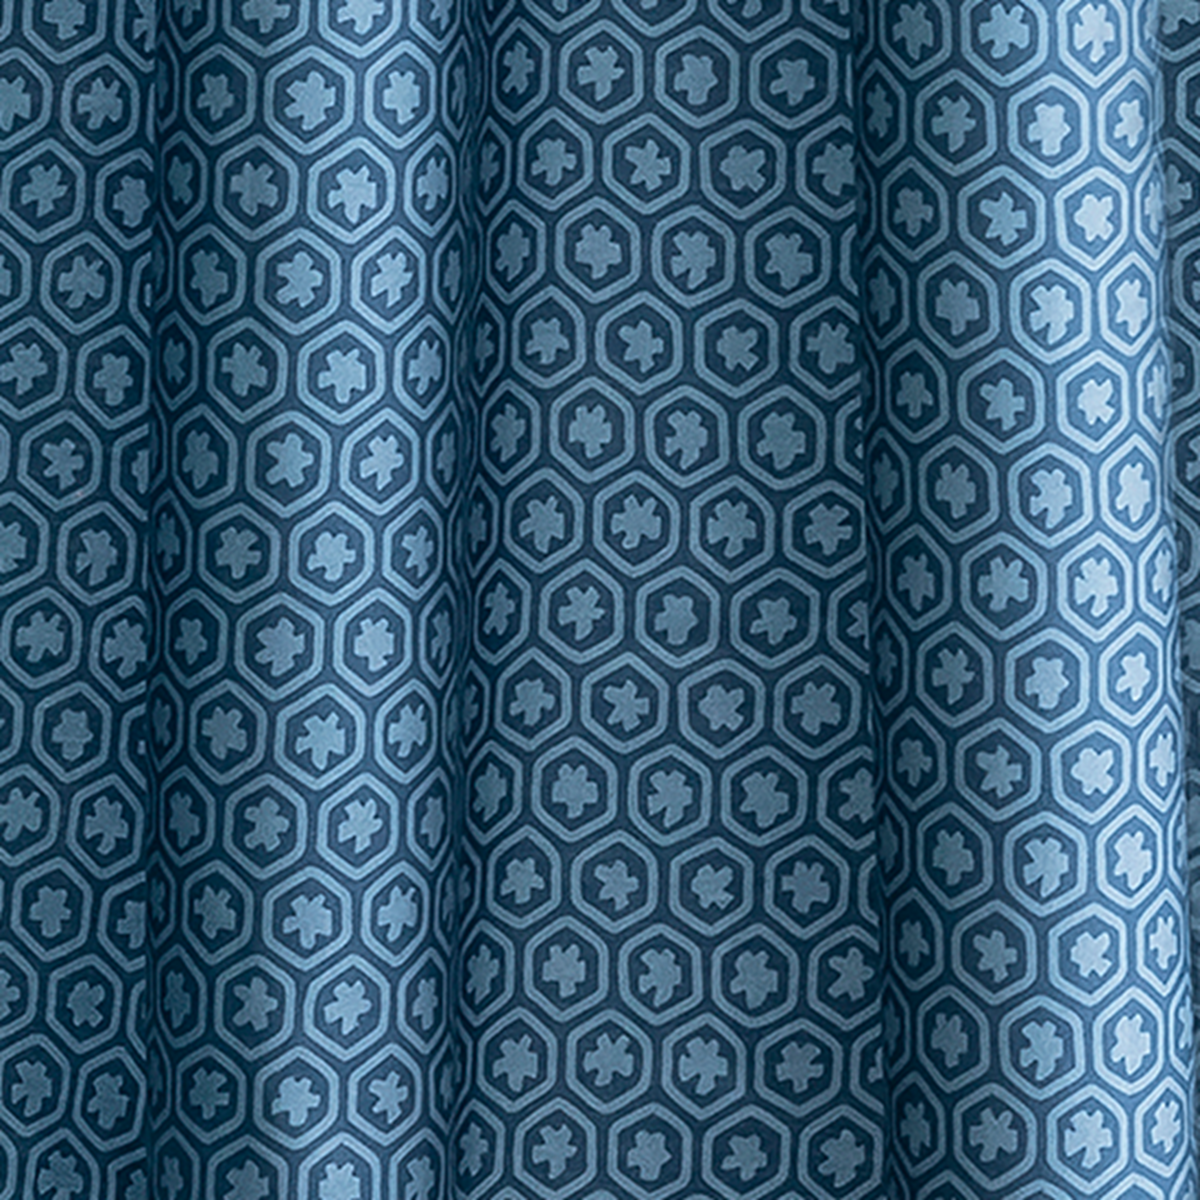 Swatch Sample of Matouk Levi Shower Curtain in Color Prussian Blue